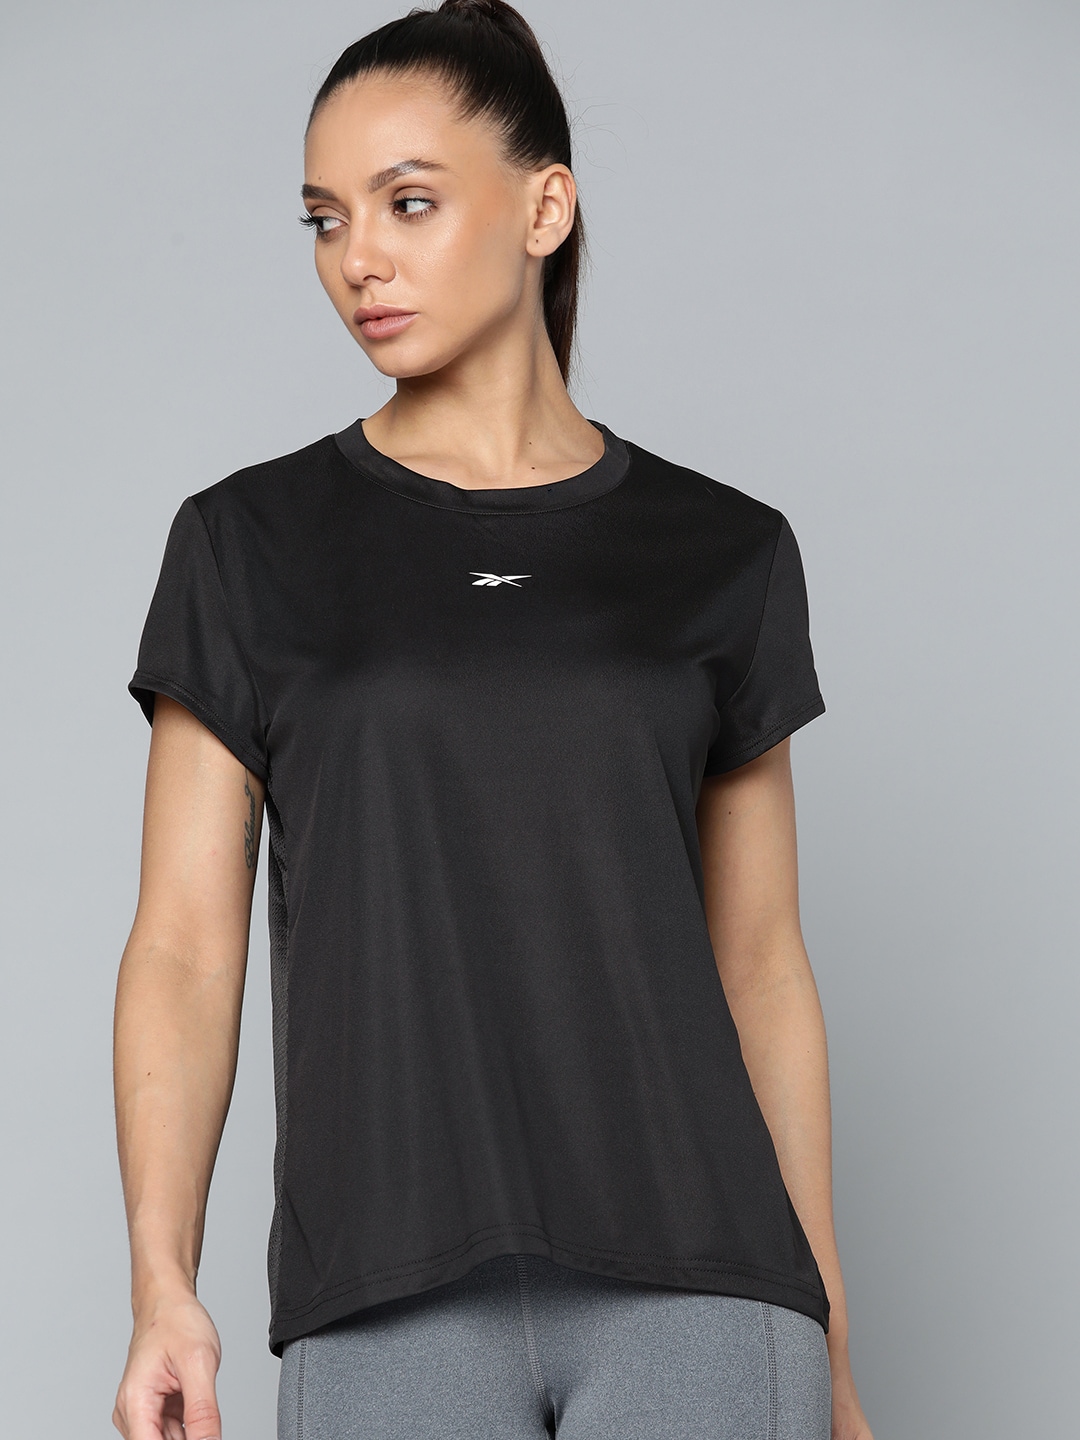 Reebok Women Black Commercial Solid Workout T-Shirt Price in India